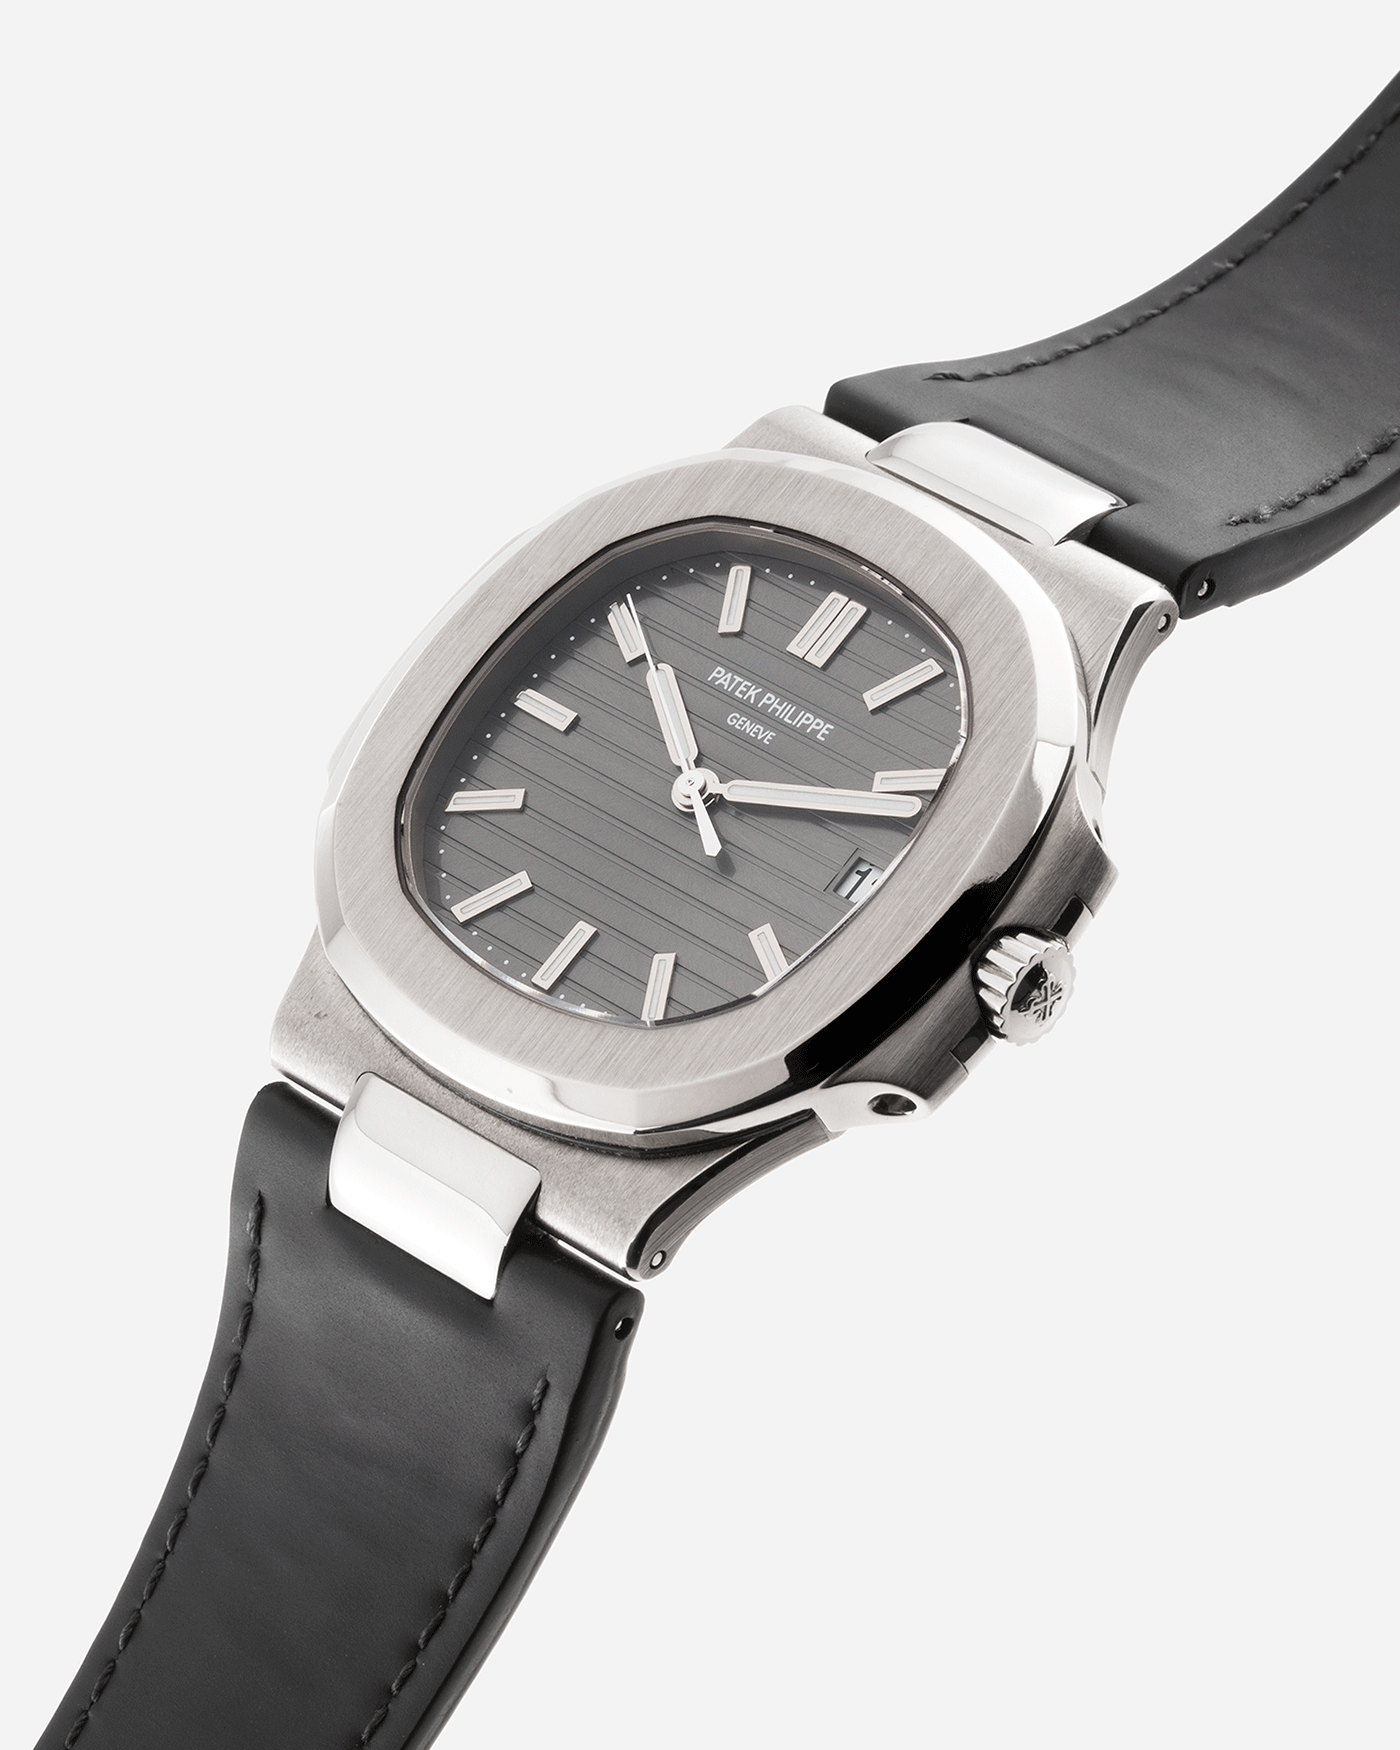 Brand: Patek Philippe Year: 2008 Model: Nautilus Reference Number: 5711G Material:18k White Gold Movement: Calibre 324SC Case Diameter: 40mm Bracelet: Patek Philippe Grey Leather Strap with 18k White Gold Nautilus Deployant